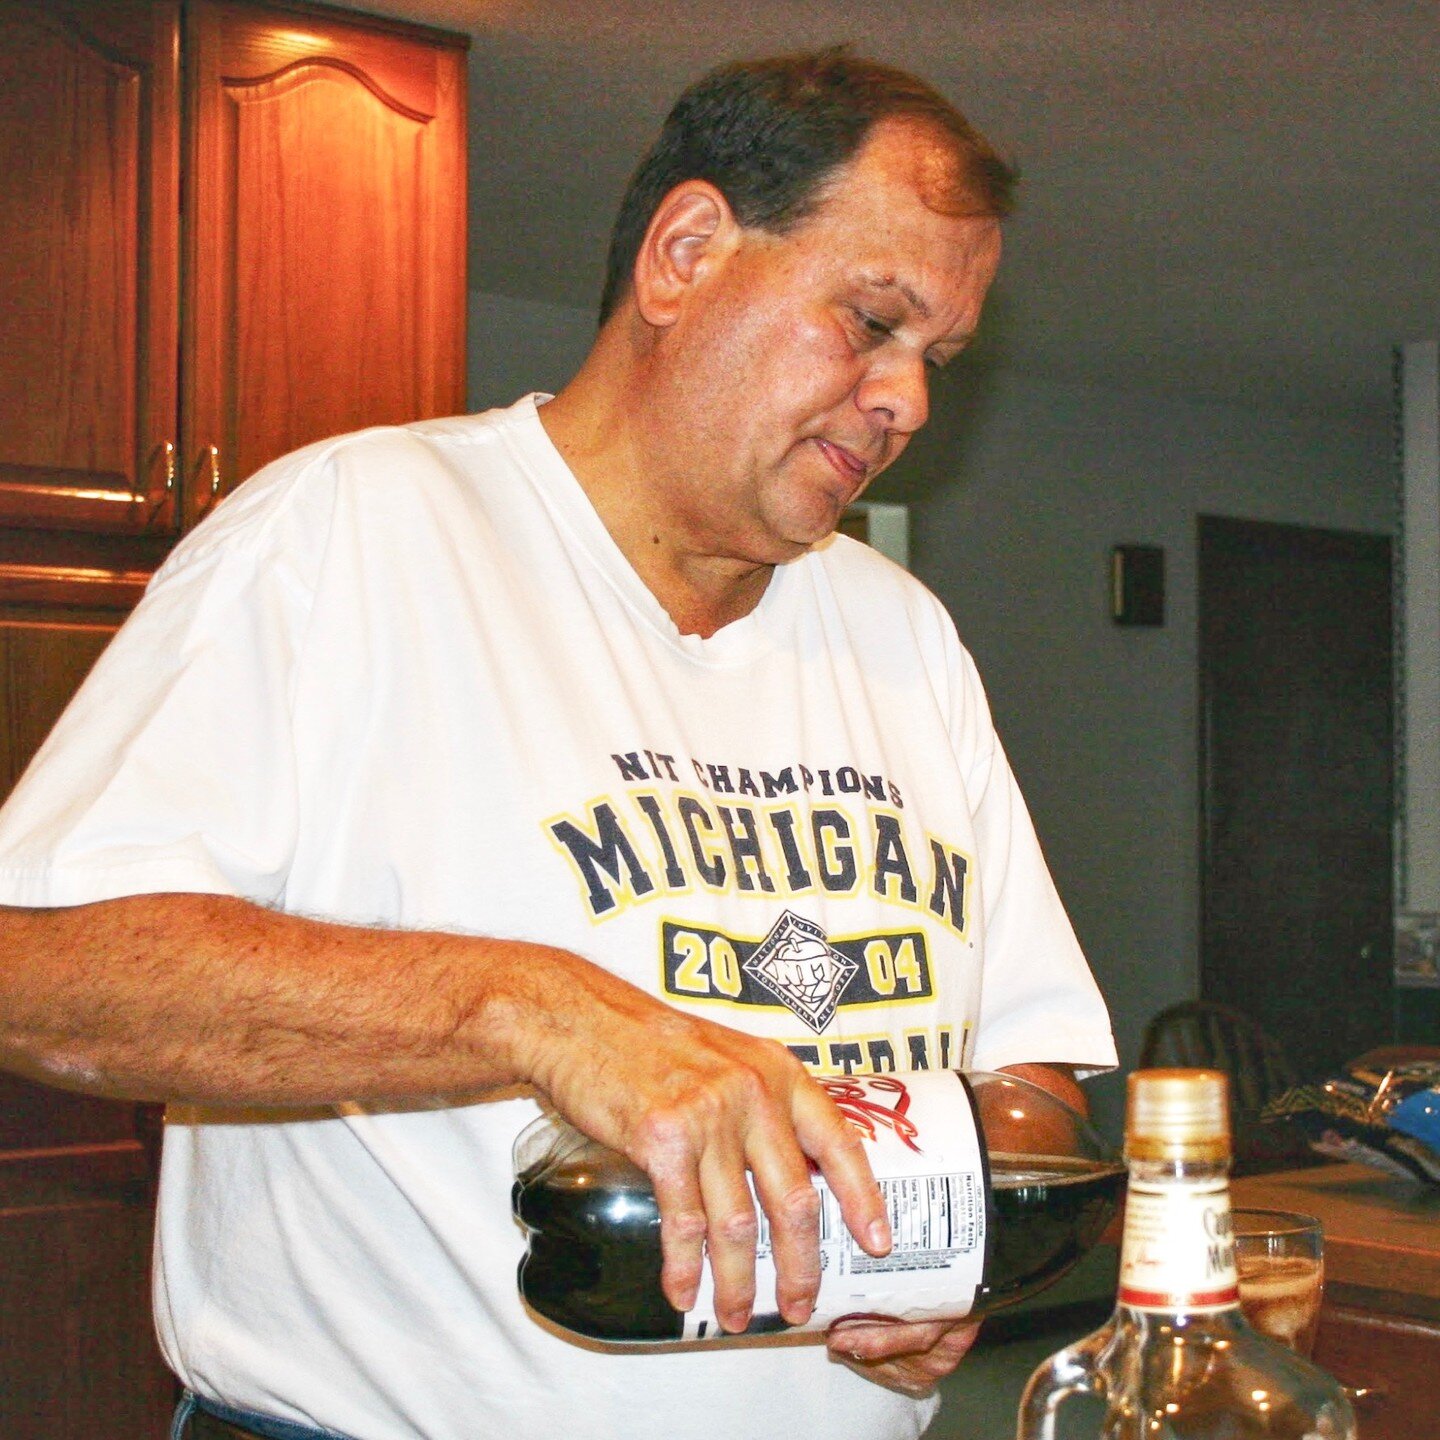 December 3, 2005: The Godfather rocks an NIT Champions T-shirt and makes a drink before the group heads to a hoops game in South Bend where the Wolverines defeated the Fighting Irish 71-67. #goblue